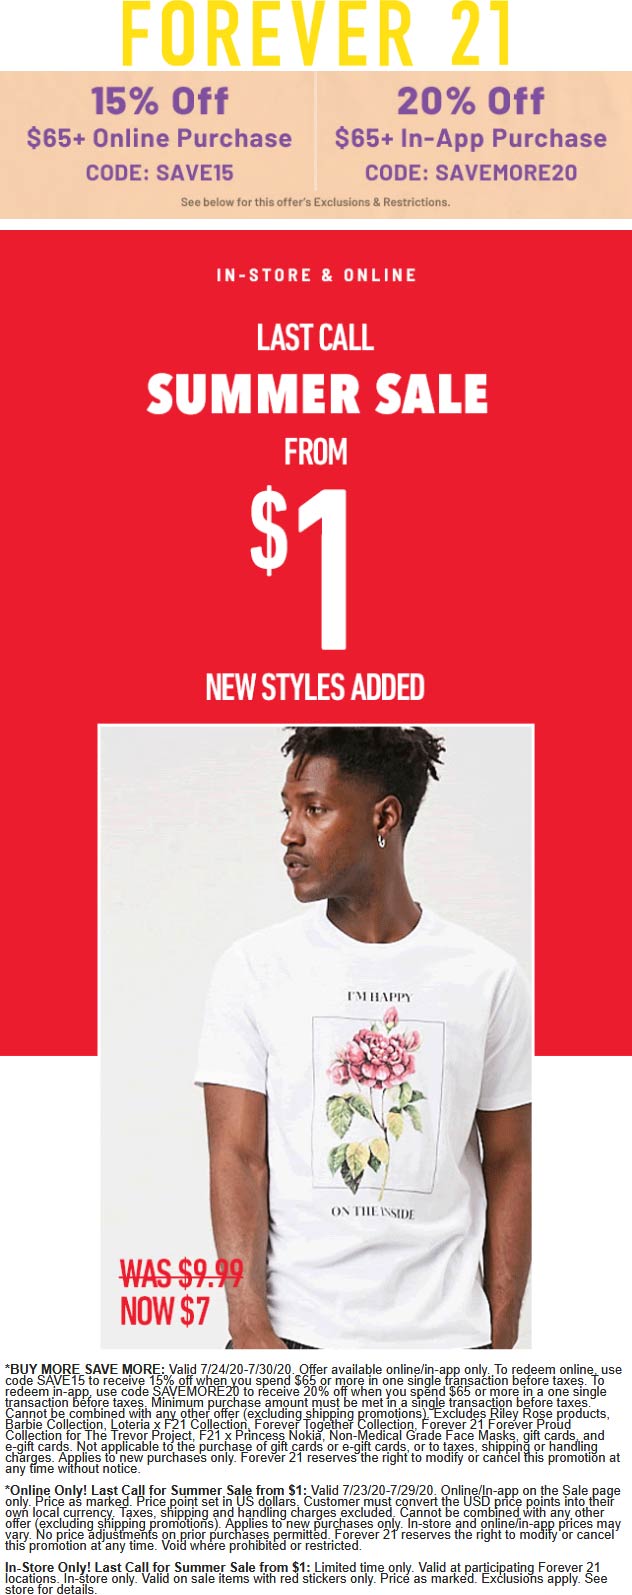 15 20% off $65  at Forever 21 via promo code SAVE15 or SAVEMORE20 #